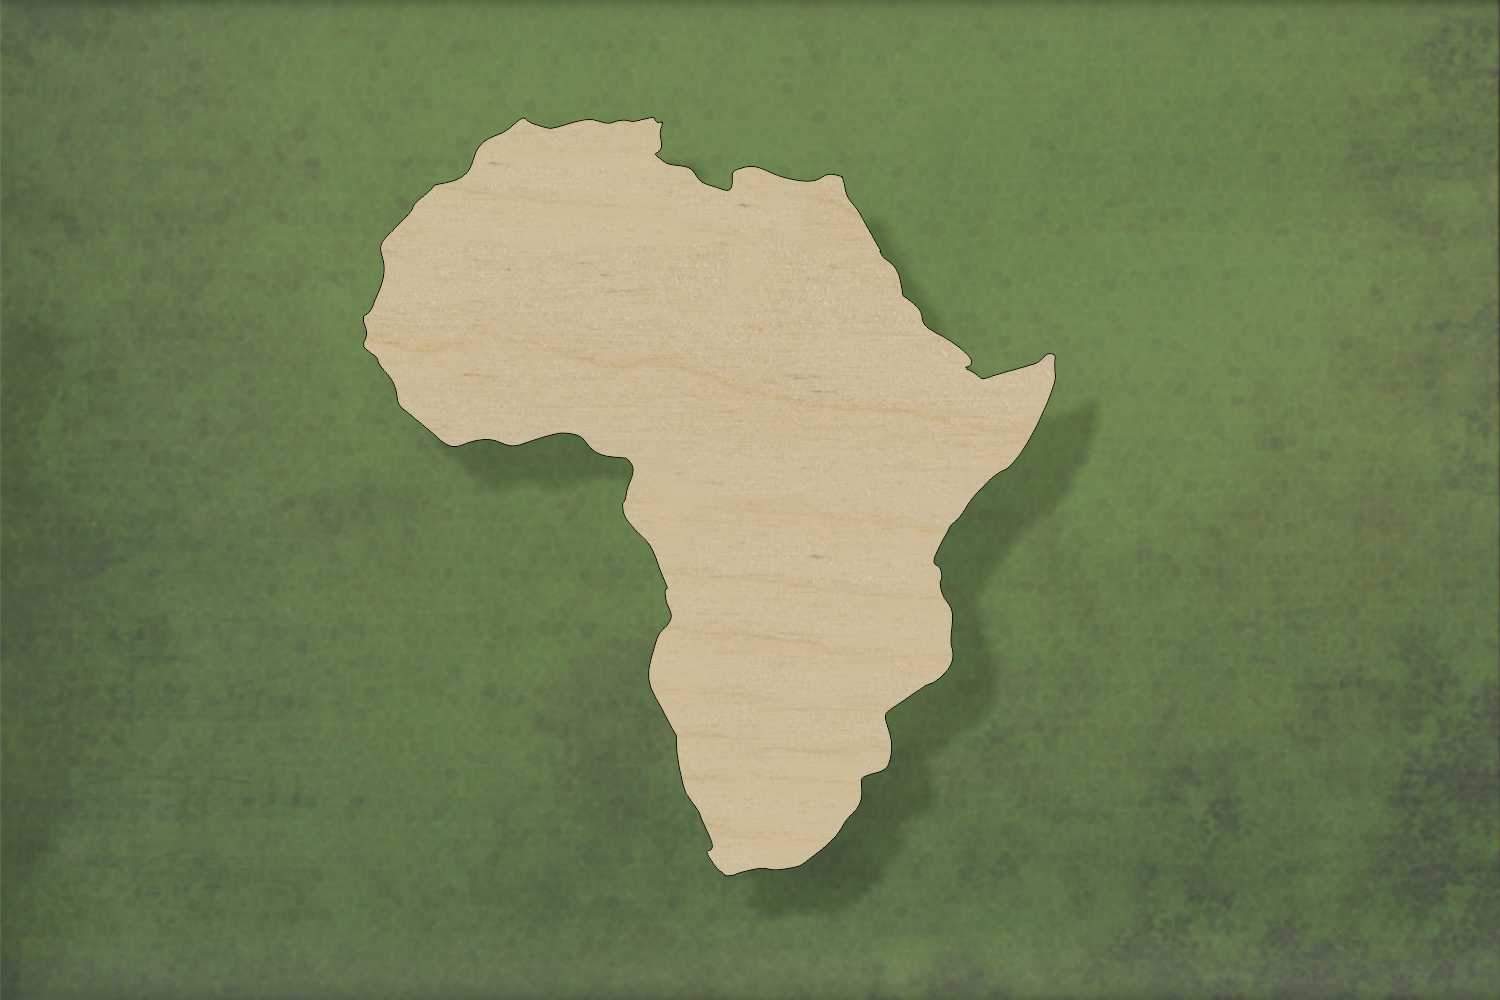 Laser cut, blank wooden Africa shape for craft